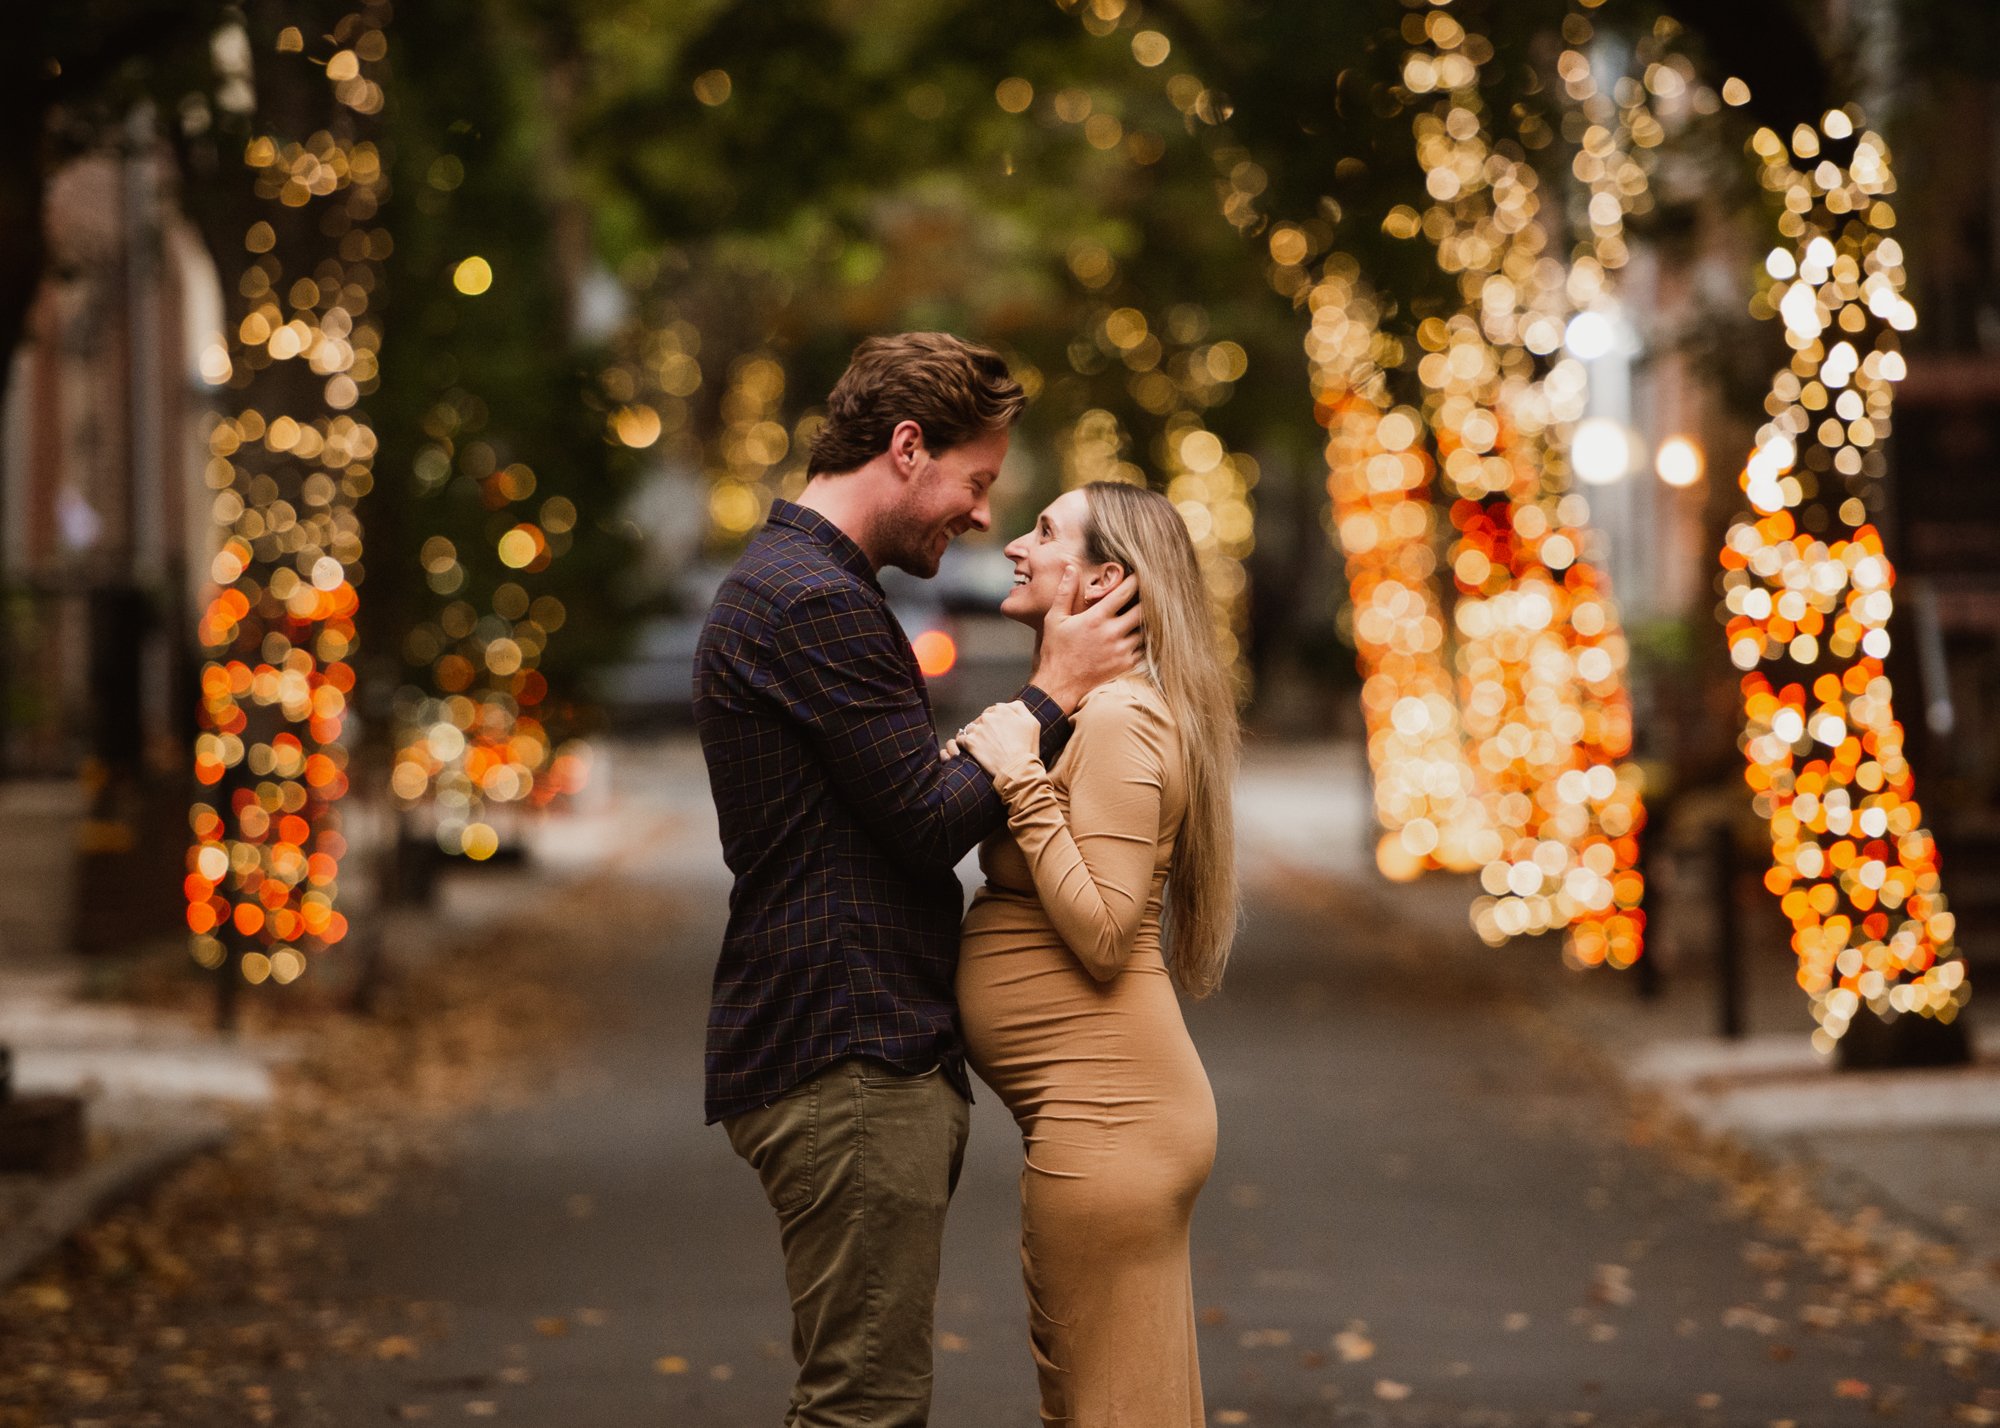 Pregnant woman and husband looking into each others eyes and smiling in the middle of Philadelphia pedestrian walkway. Trees with fairy lights in background.